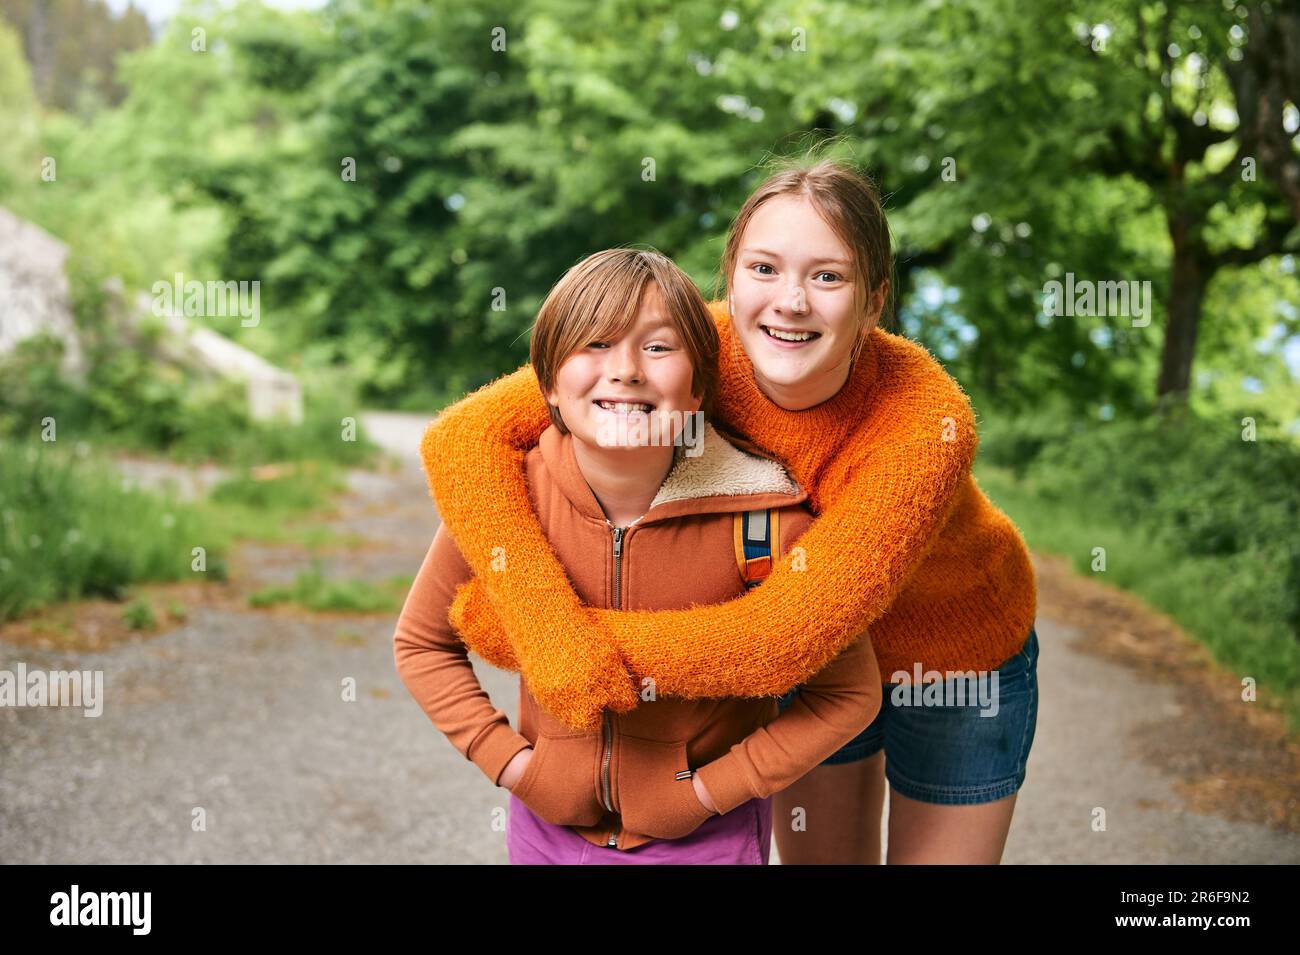 Outdoor portrait of two funny kids hugging each other, teenage sister and little brother spending time together outside Stock Photo